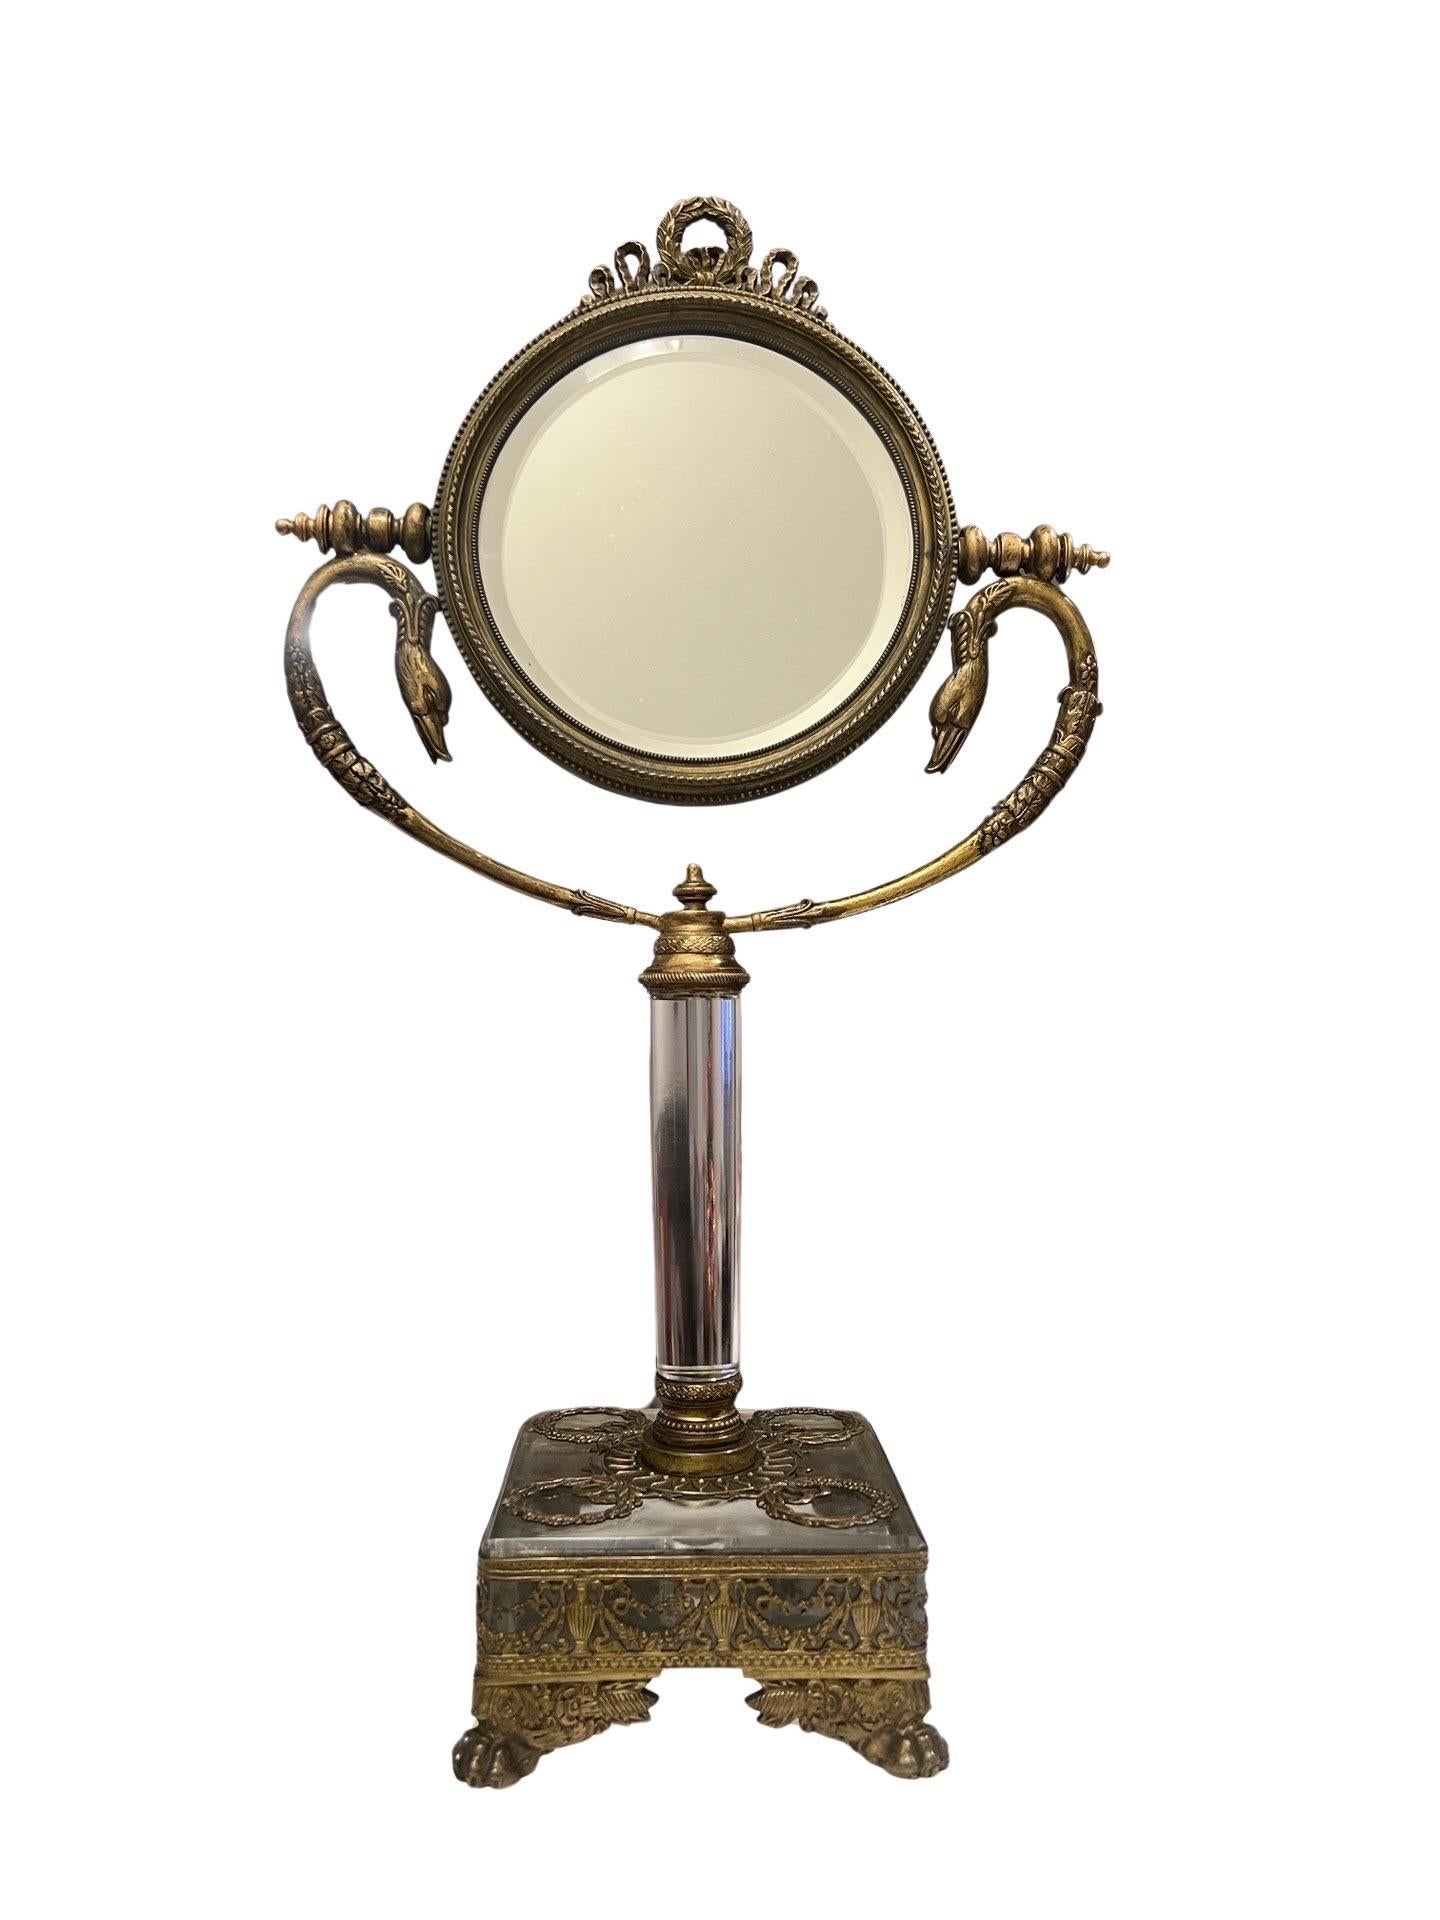 French Antique Fine Neoclassical Gilt Bronze & Glass Vanity Mirror W/ Swan Supports For Sale